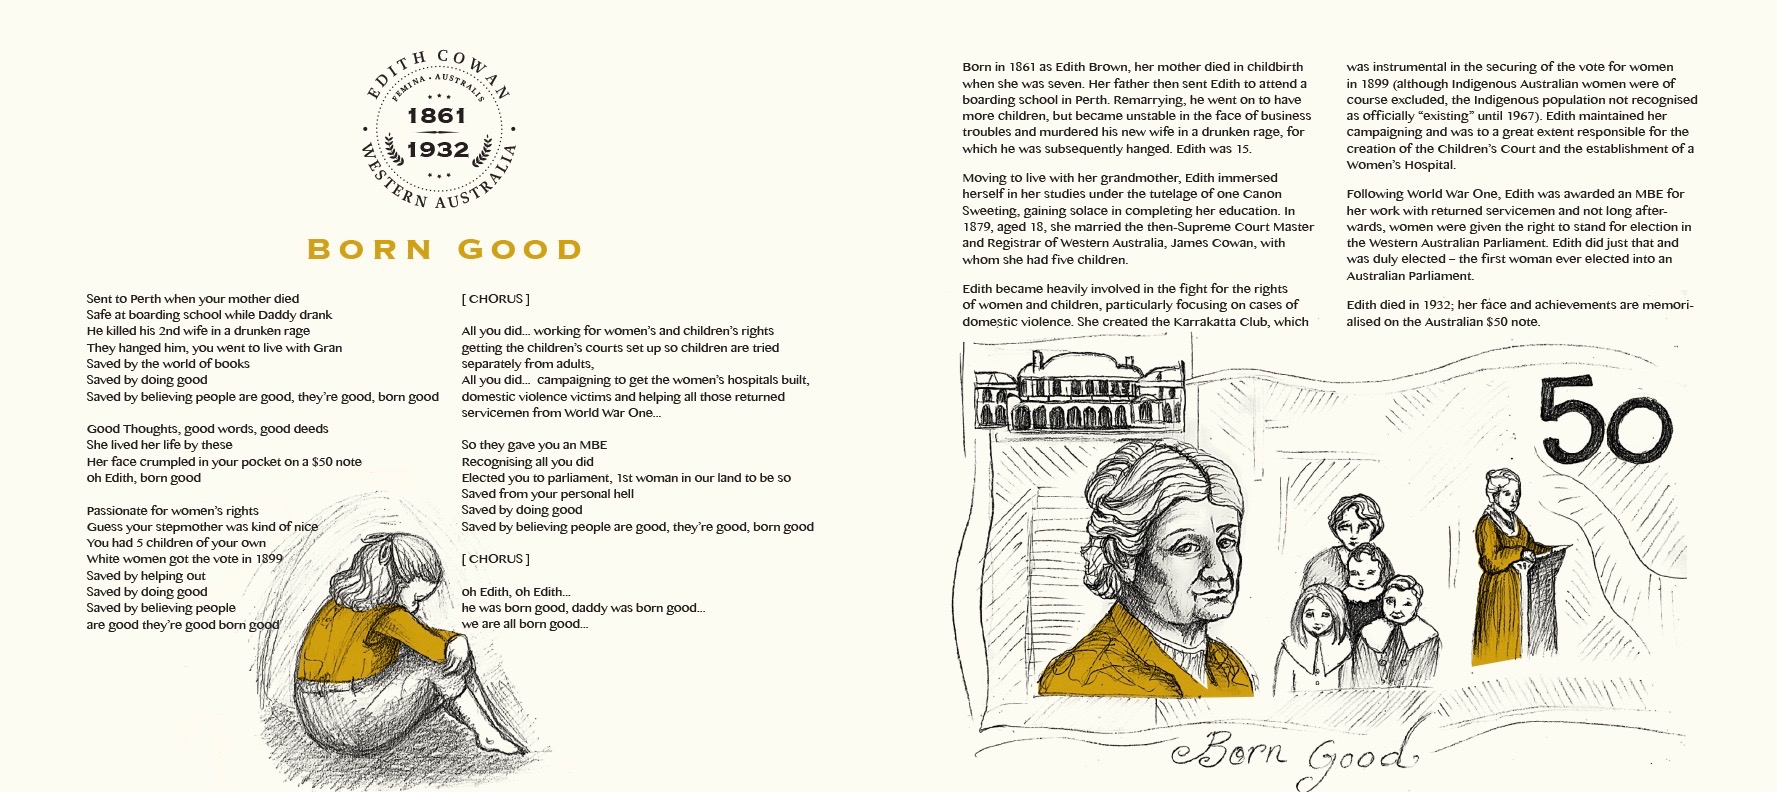 Born Good, about Edith Cowan - exerpt from the CD Book/PDF. Lyrics on the left, the story of Edith's life on the right, fully illustrated by artist Sharon McLeod.